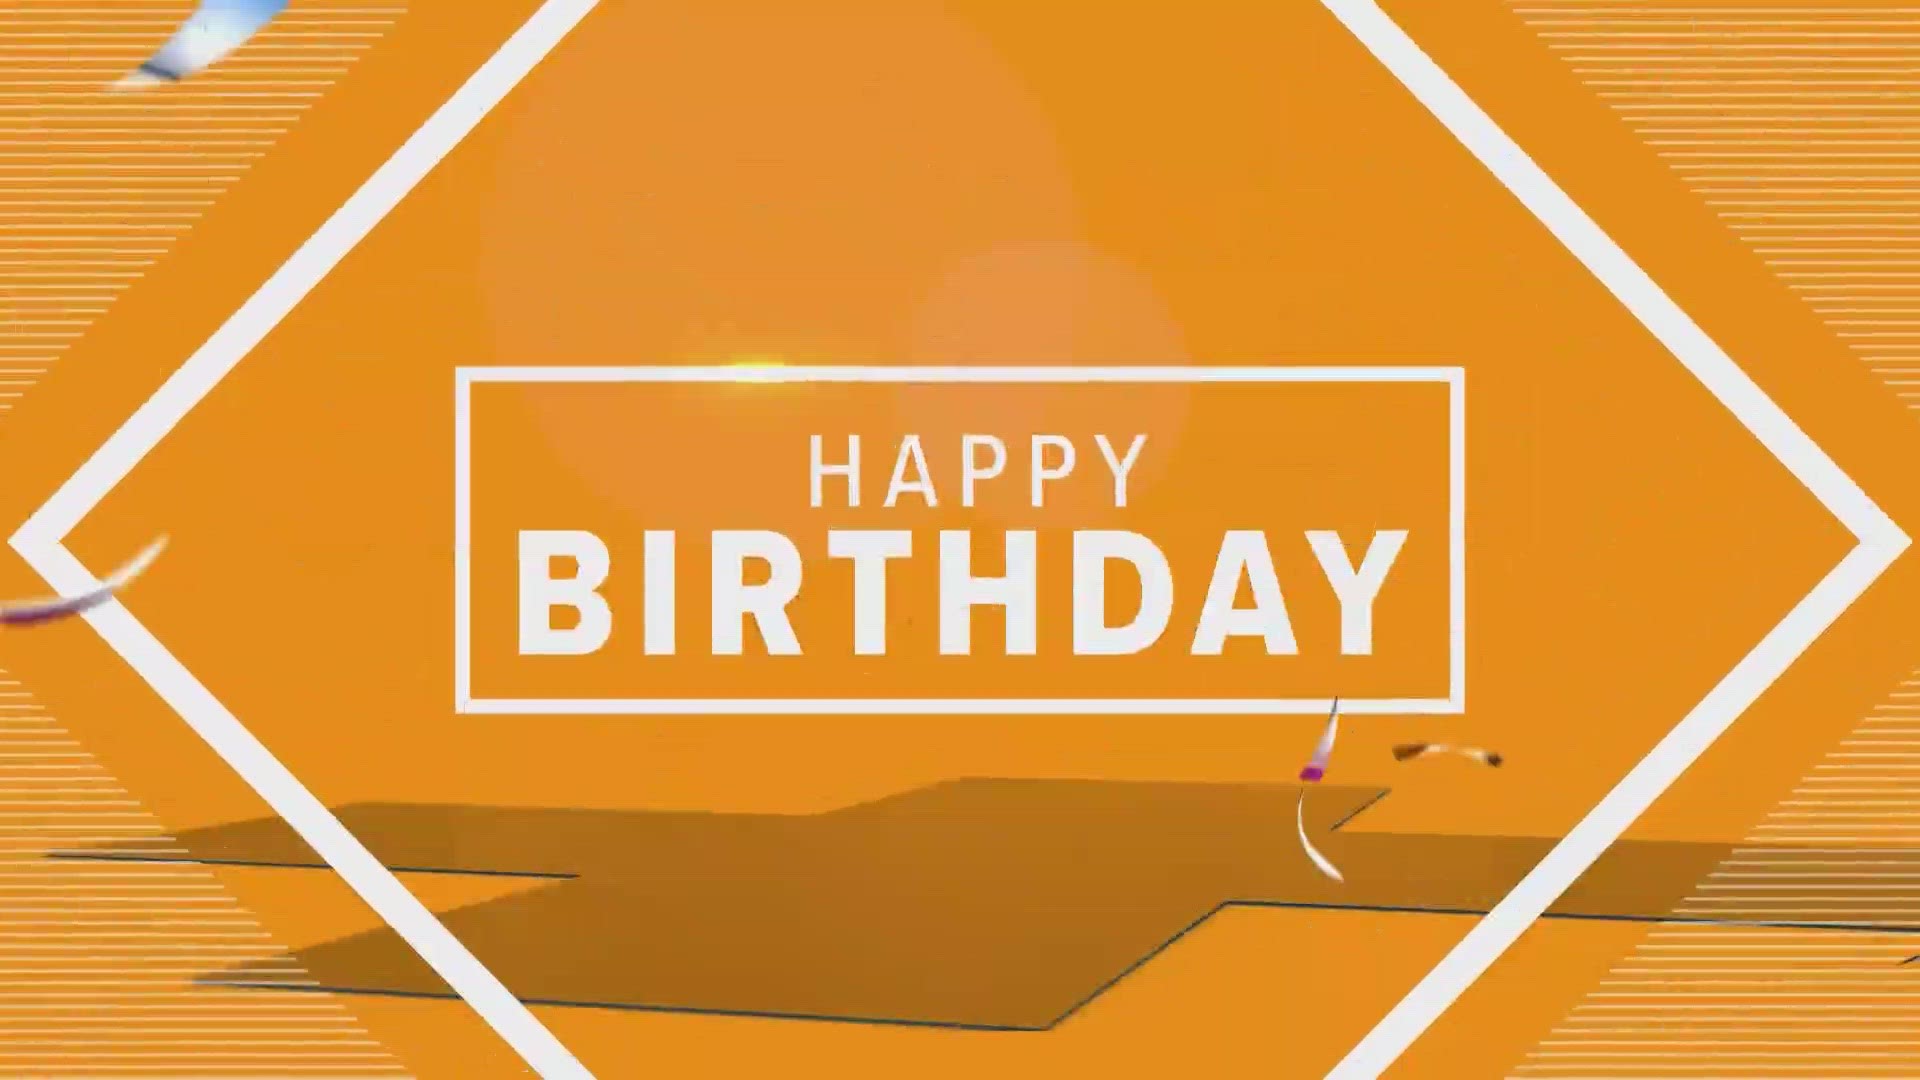 Texas Today wishes everyone born on May 24, a very happy birthday!